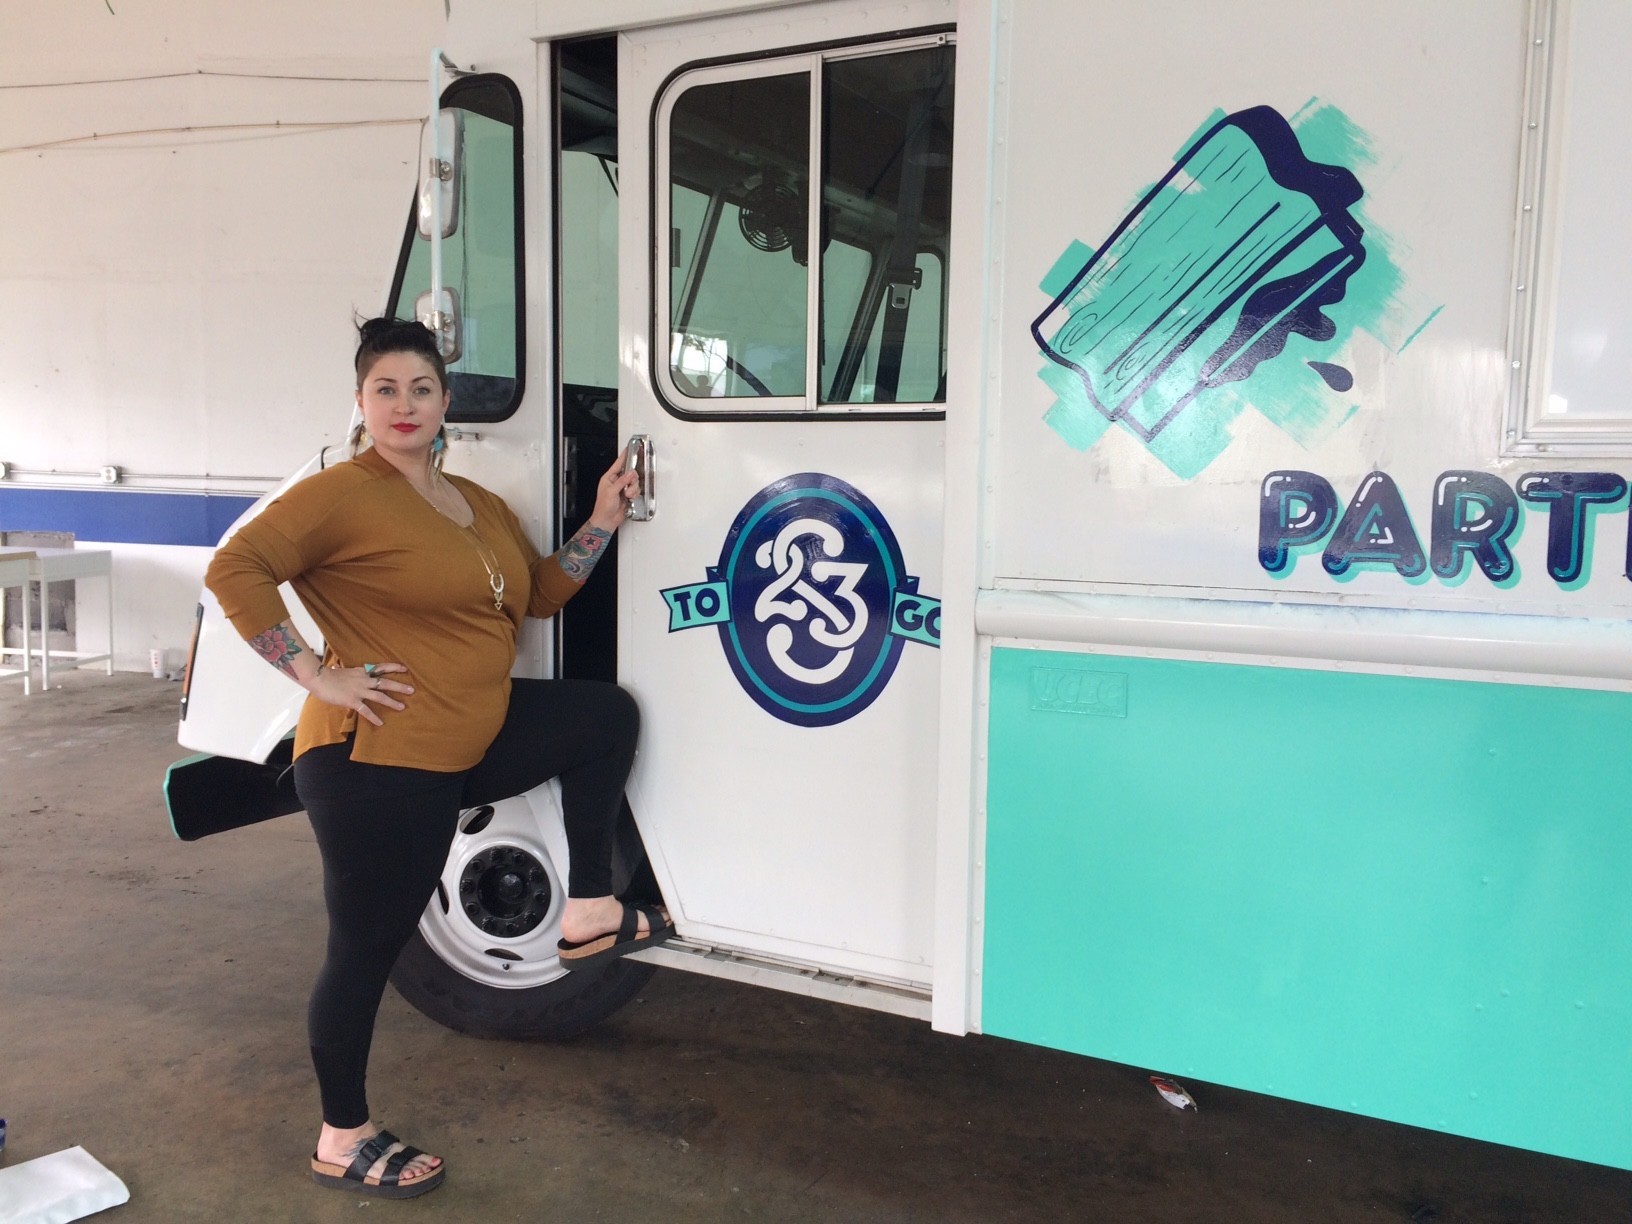 Recent Style Weekly Women in the Arts honoree, Ashley Hawkins stands next to Studio Two Three's new mobile studio.